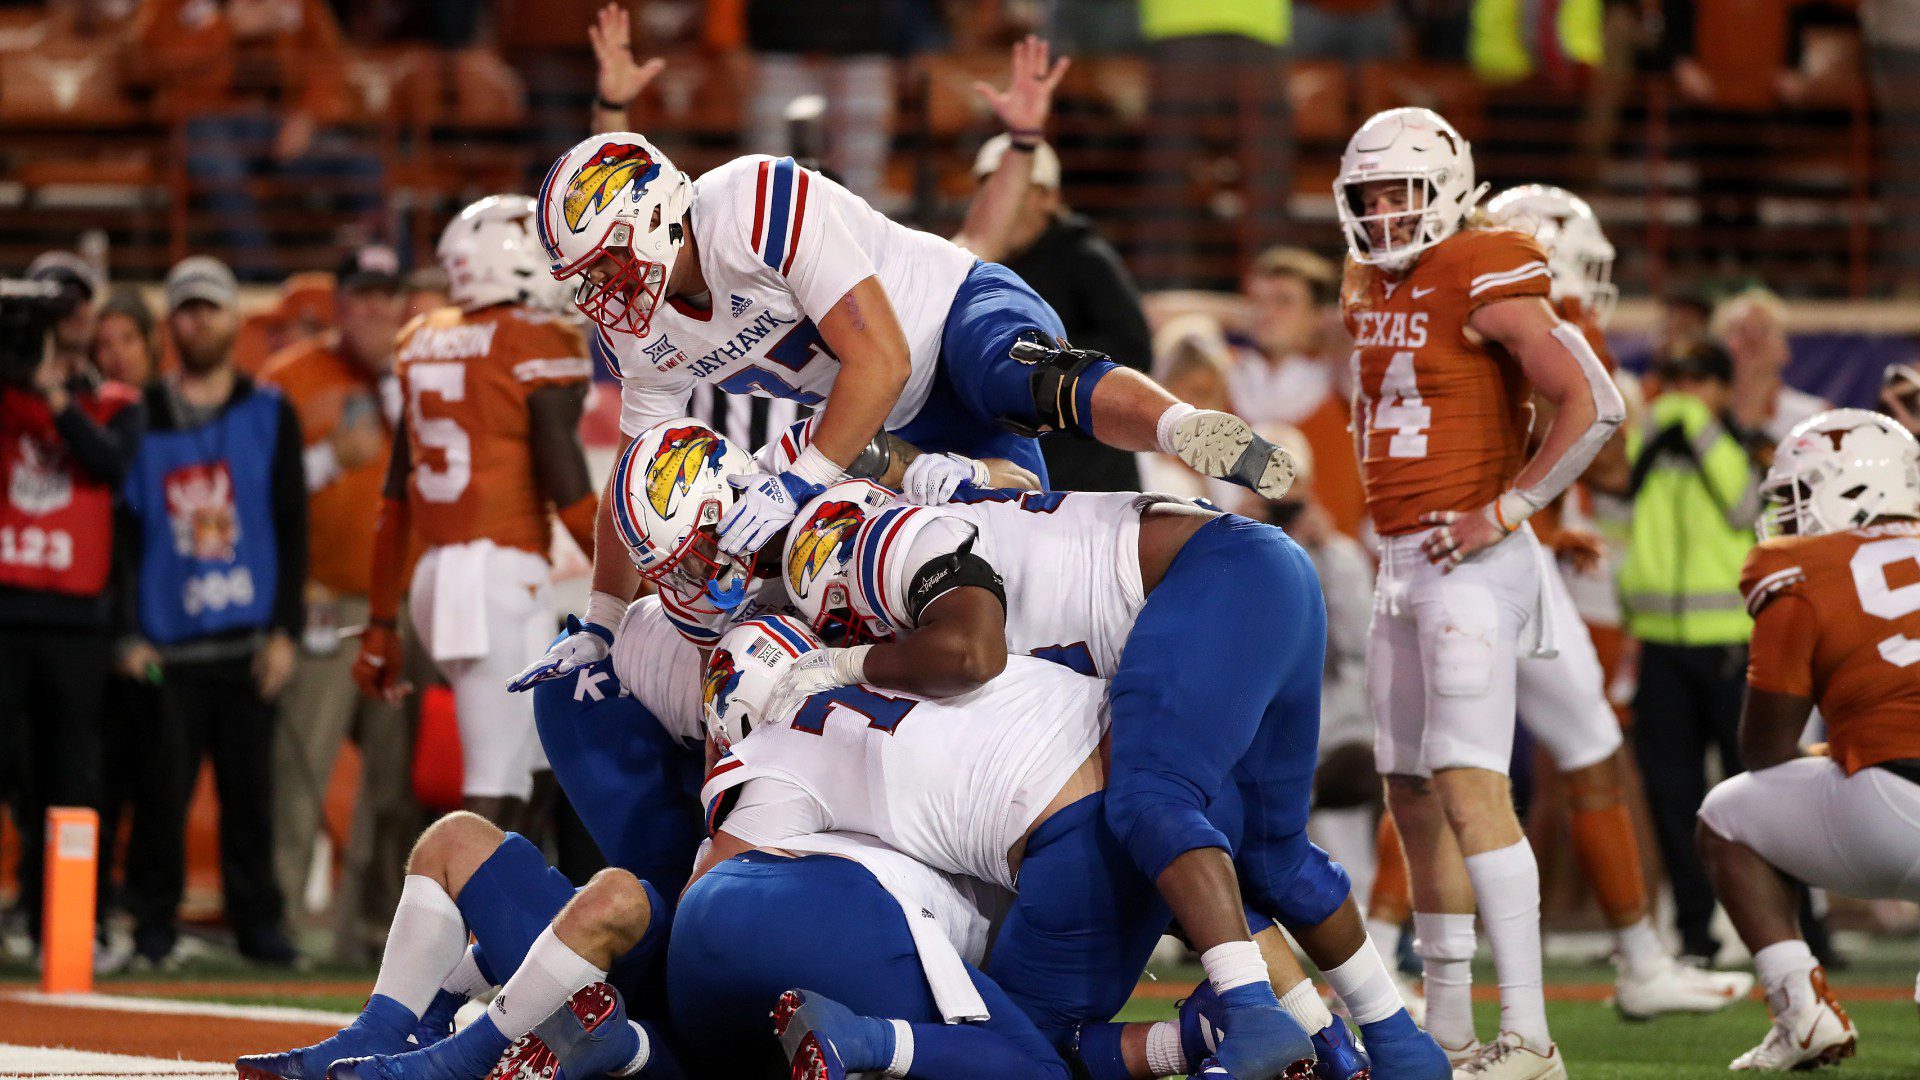 Kansas-winning-2-point-conversion-vs-Texas-aided-by-missed-holding